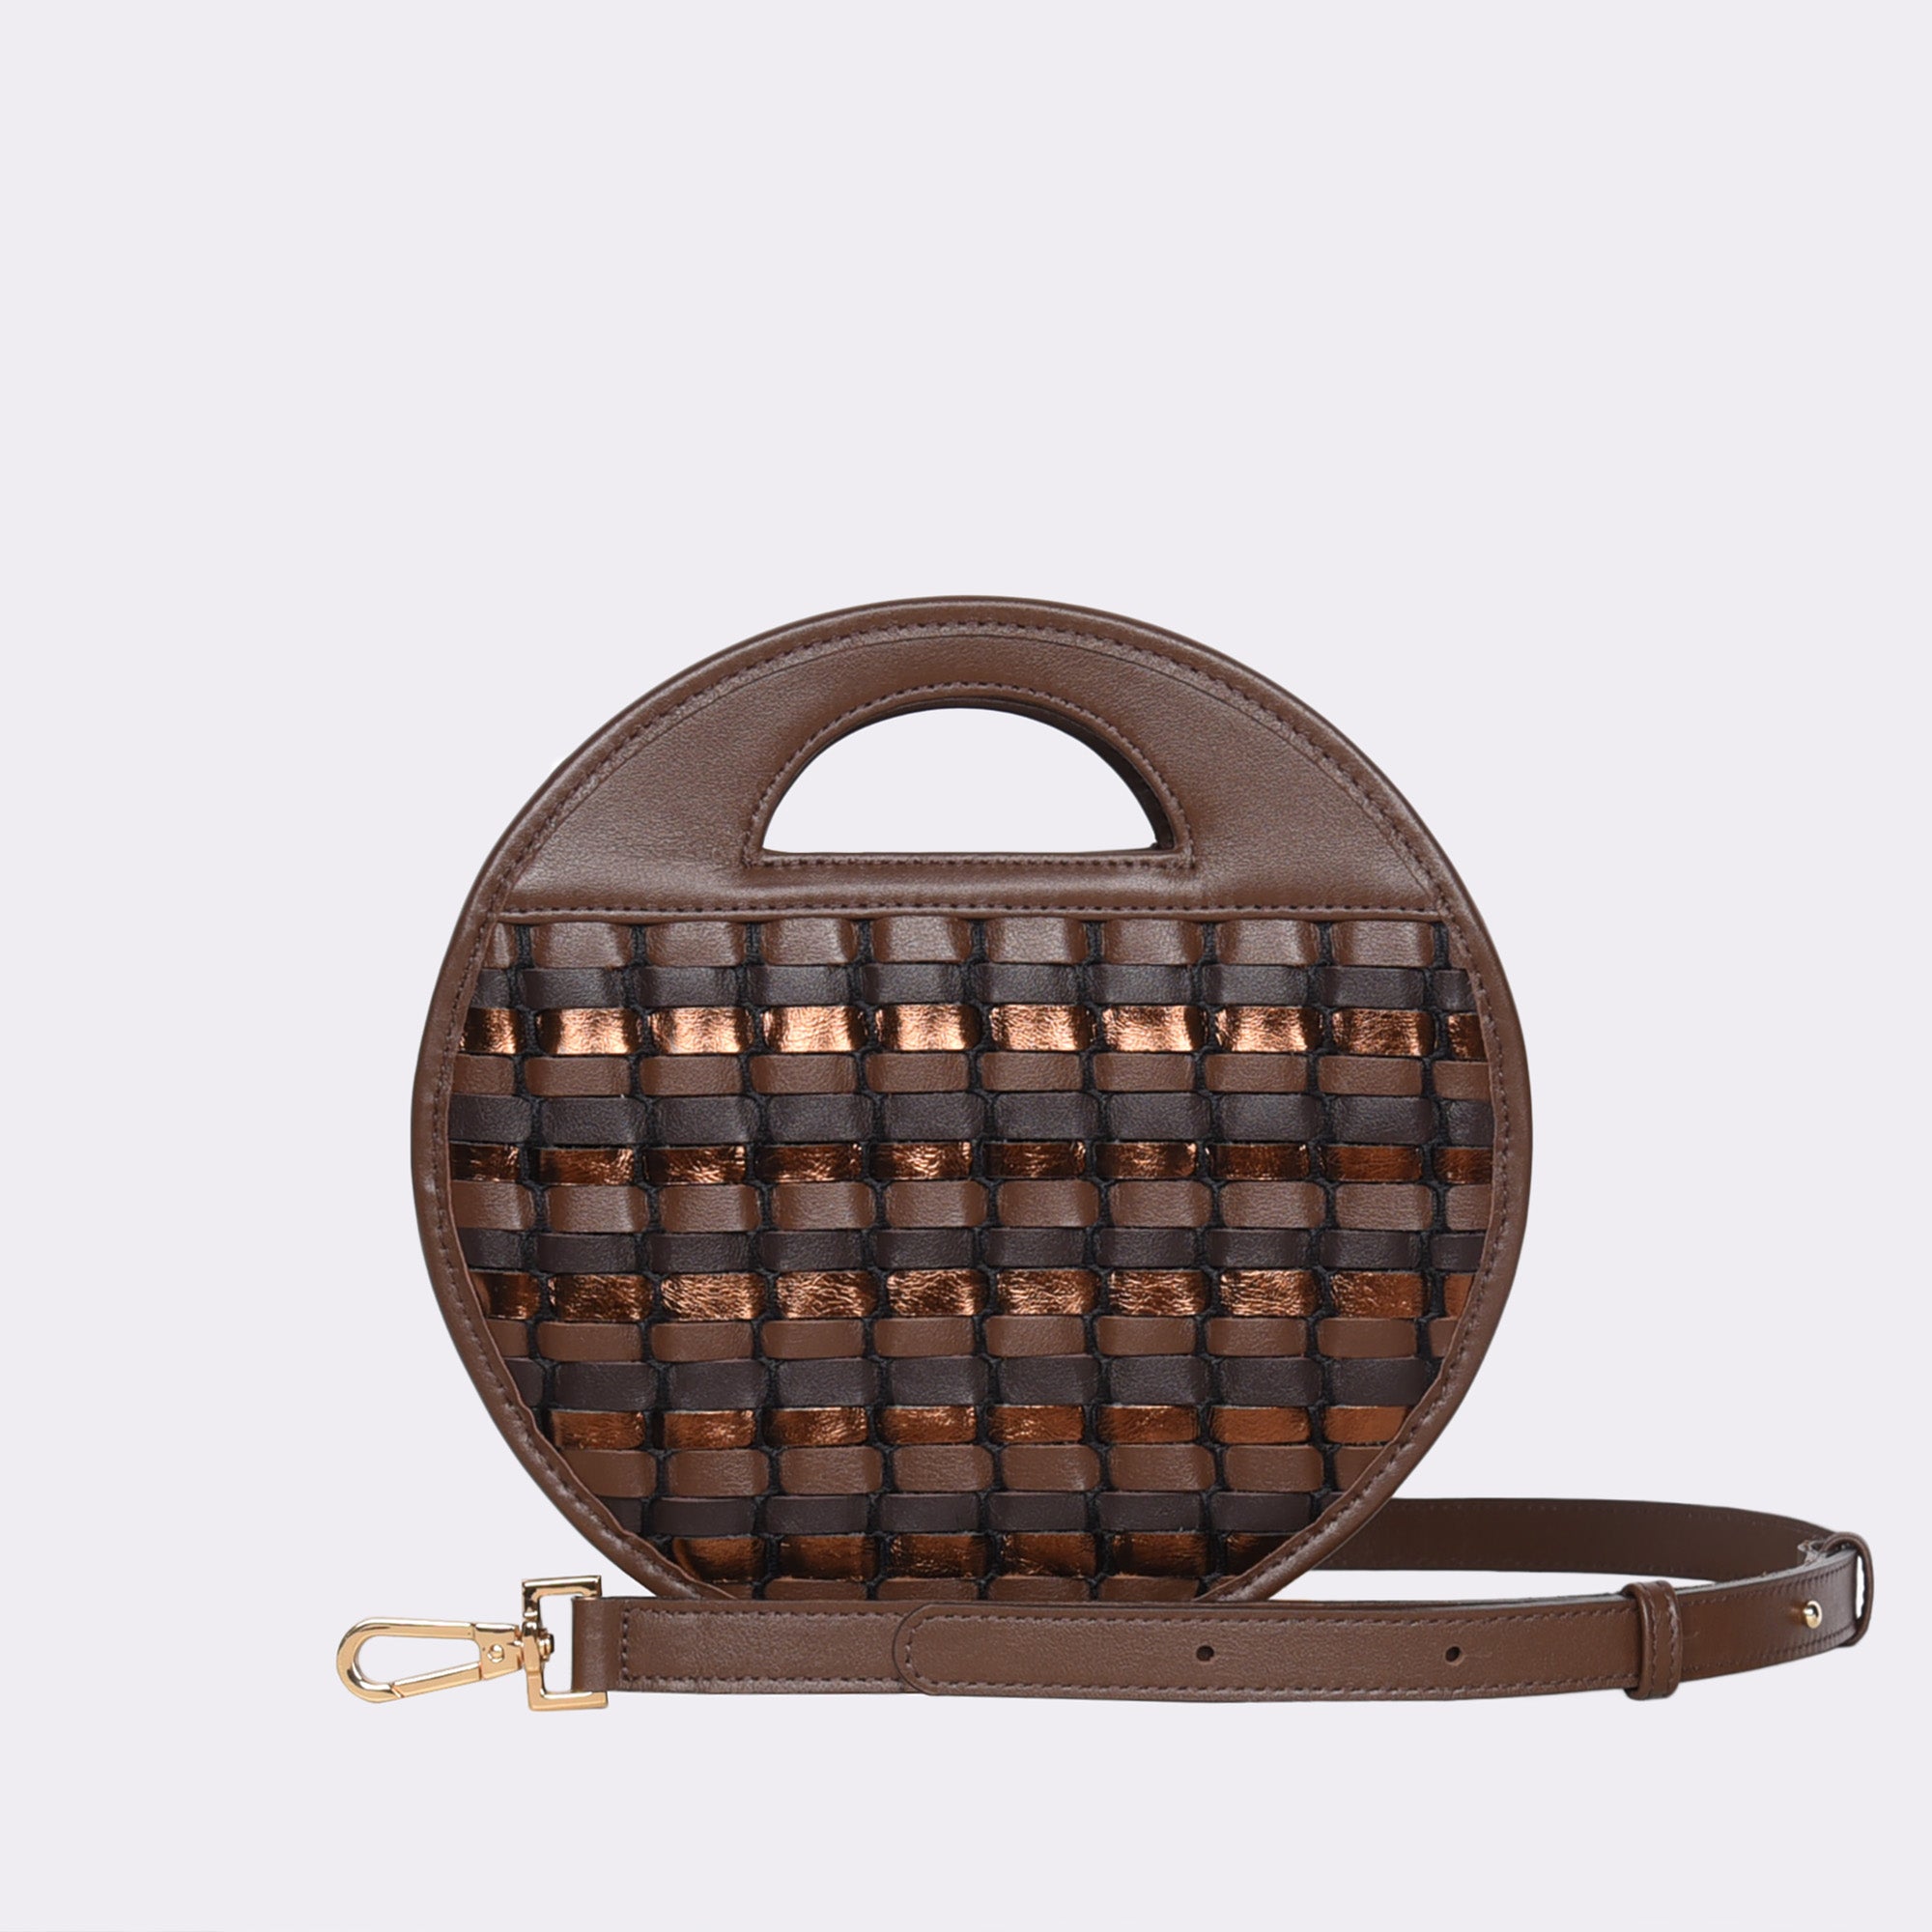 Picture of American made luxury top handle round crossbody bag with various brown and gold toned handwoven leathers.